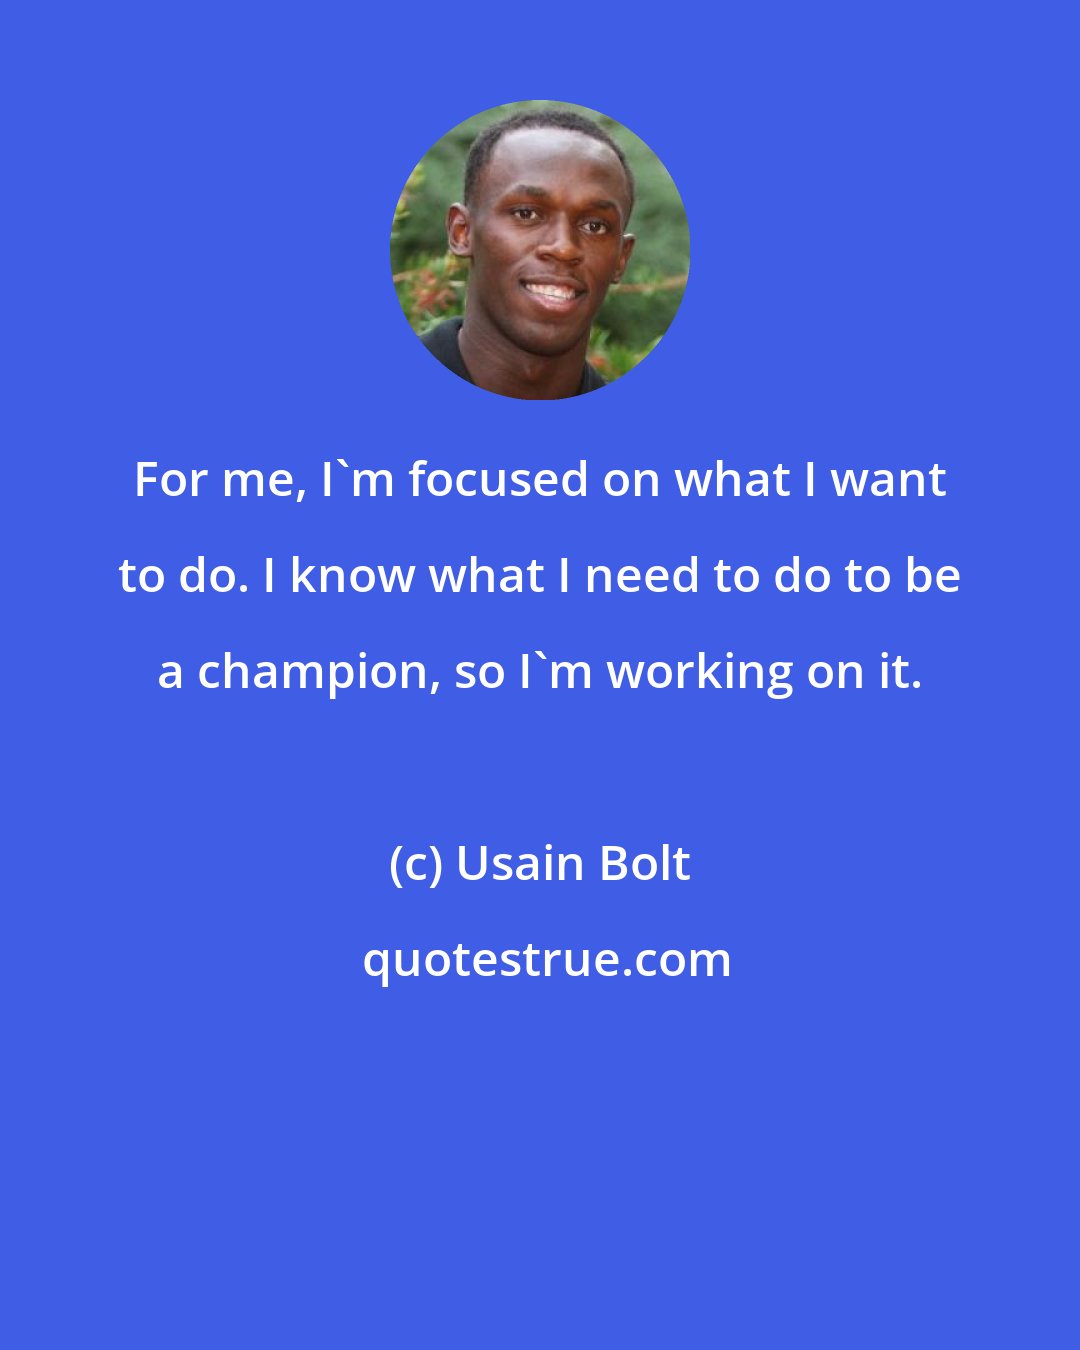 Usain Bolt: For me, I'm focused on what I want to do. I know what I need to do to be a champion, so I'm working on it.